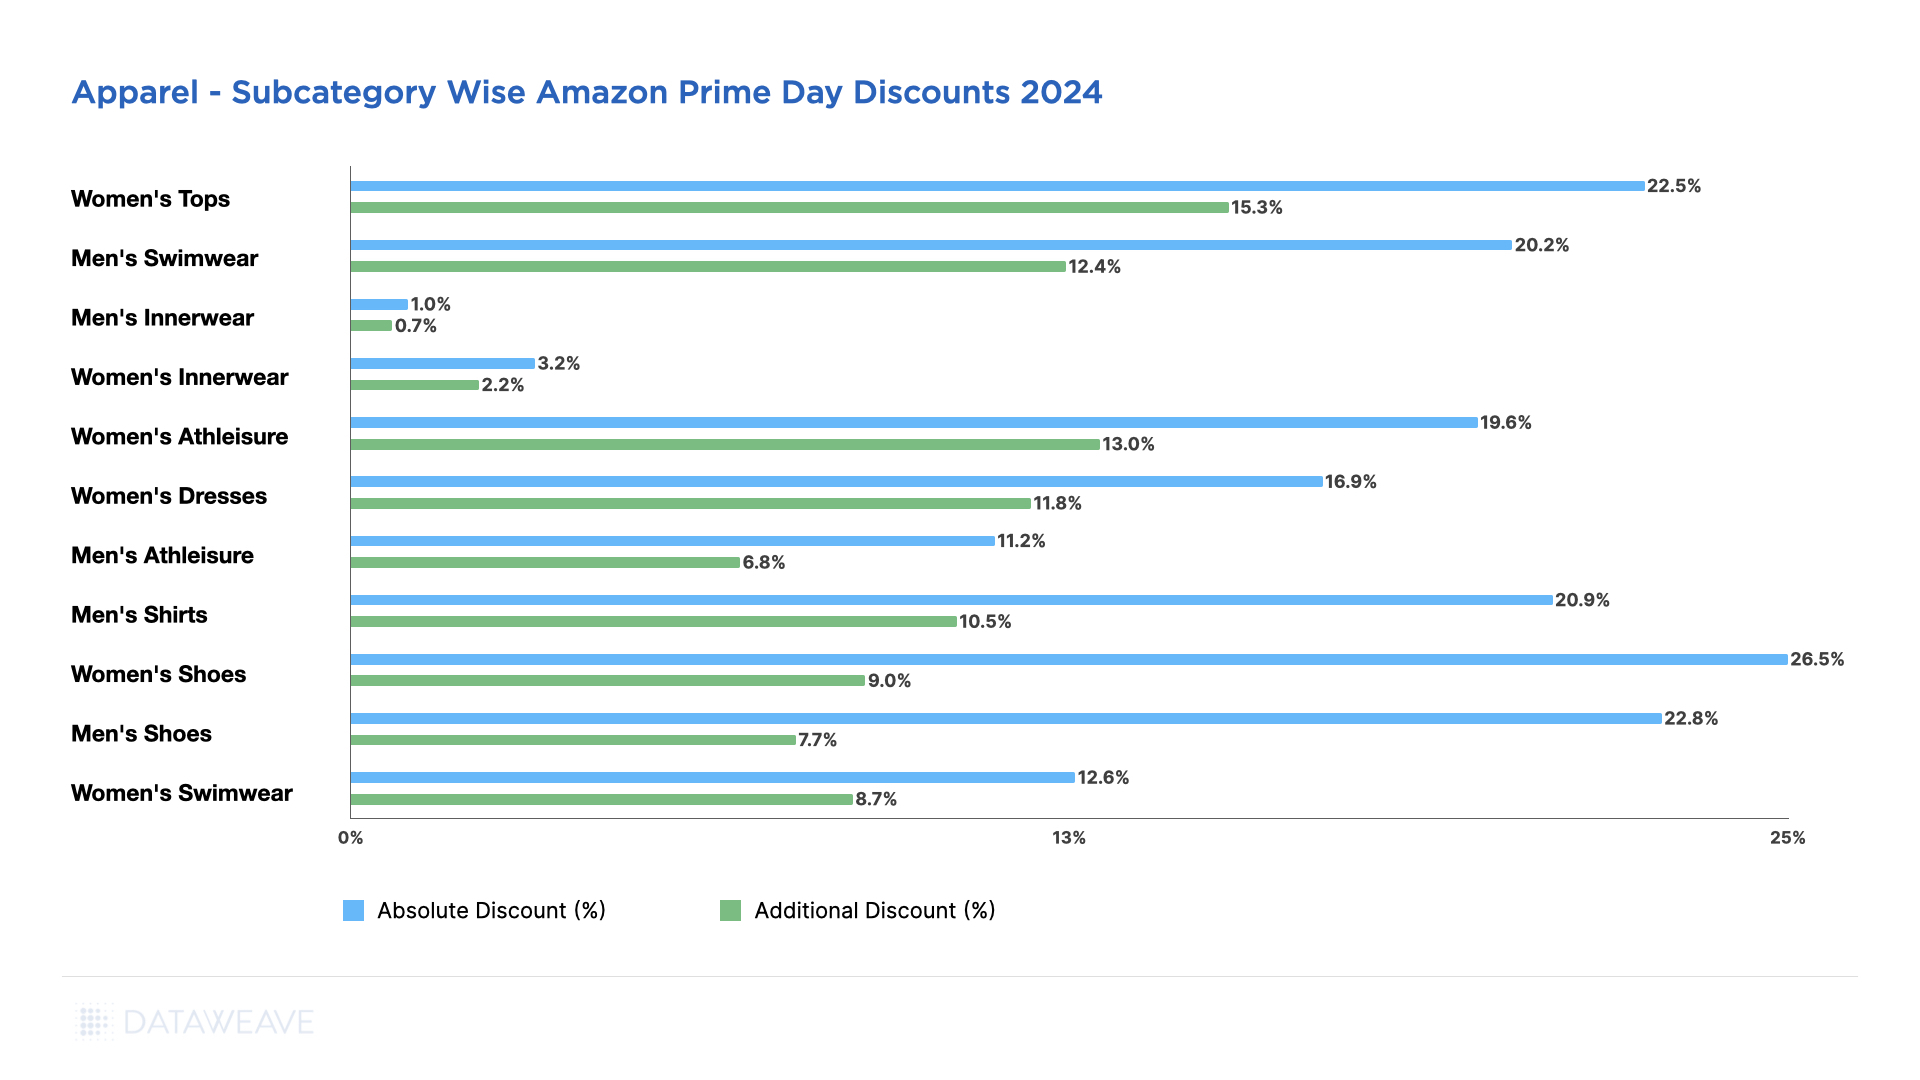 Discounts offered on Apparel Subcategories During Amazon Prime Day USA 2024